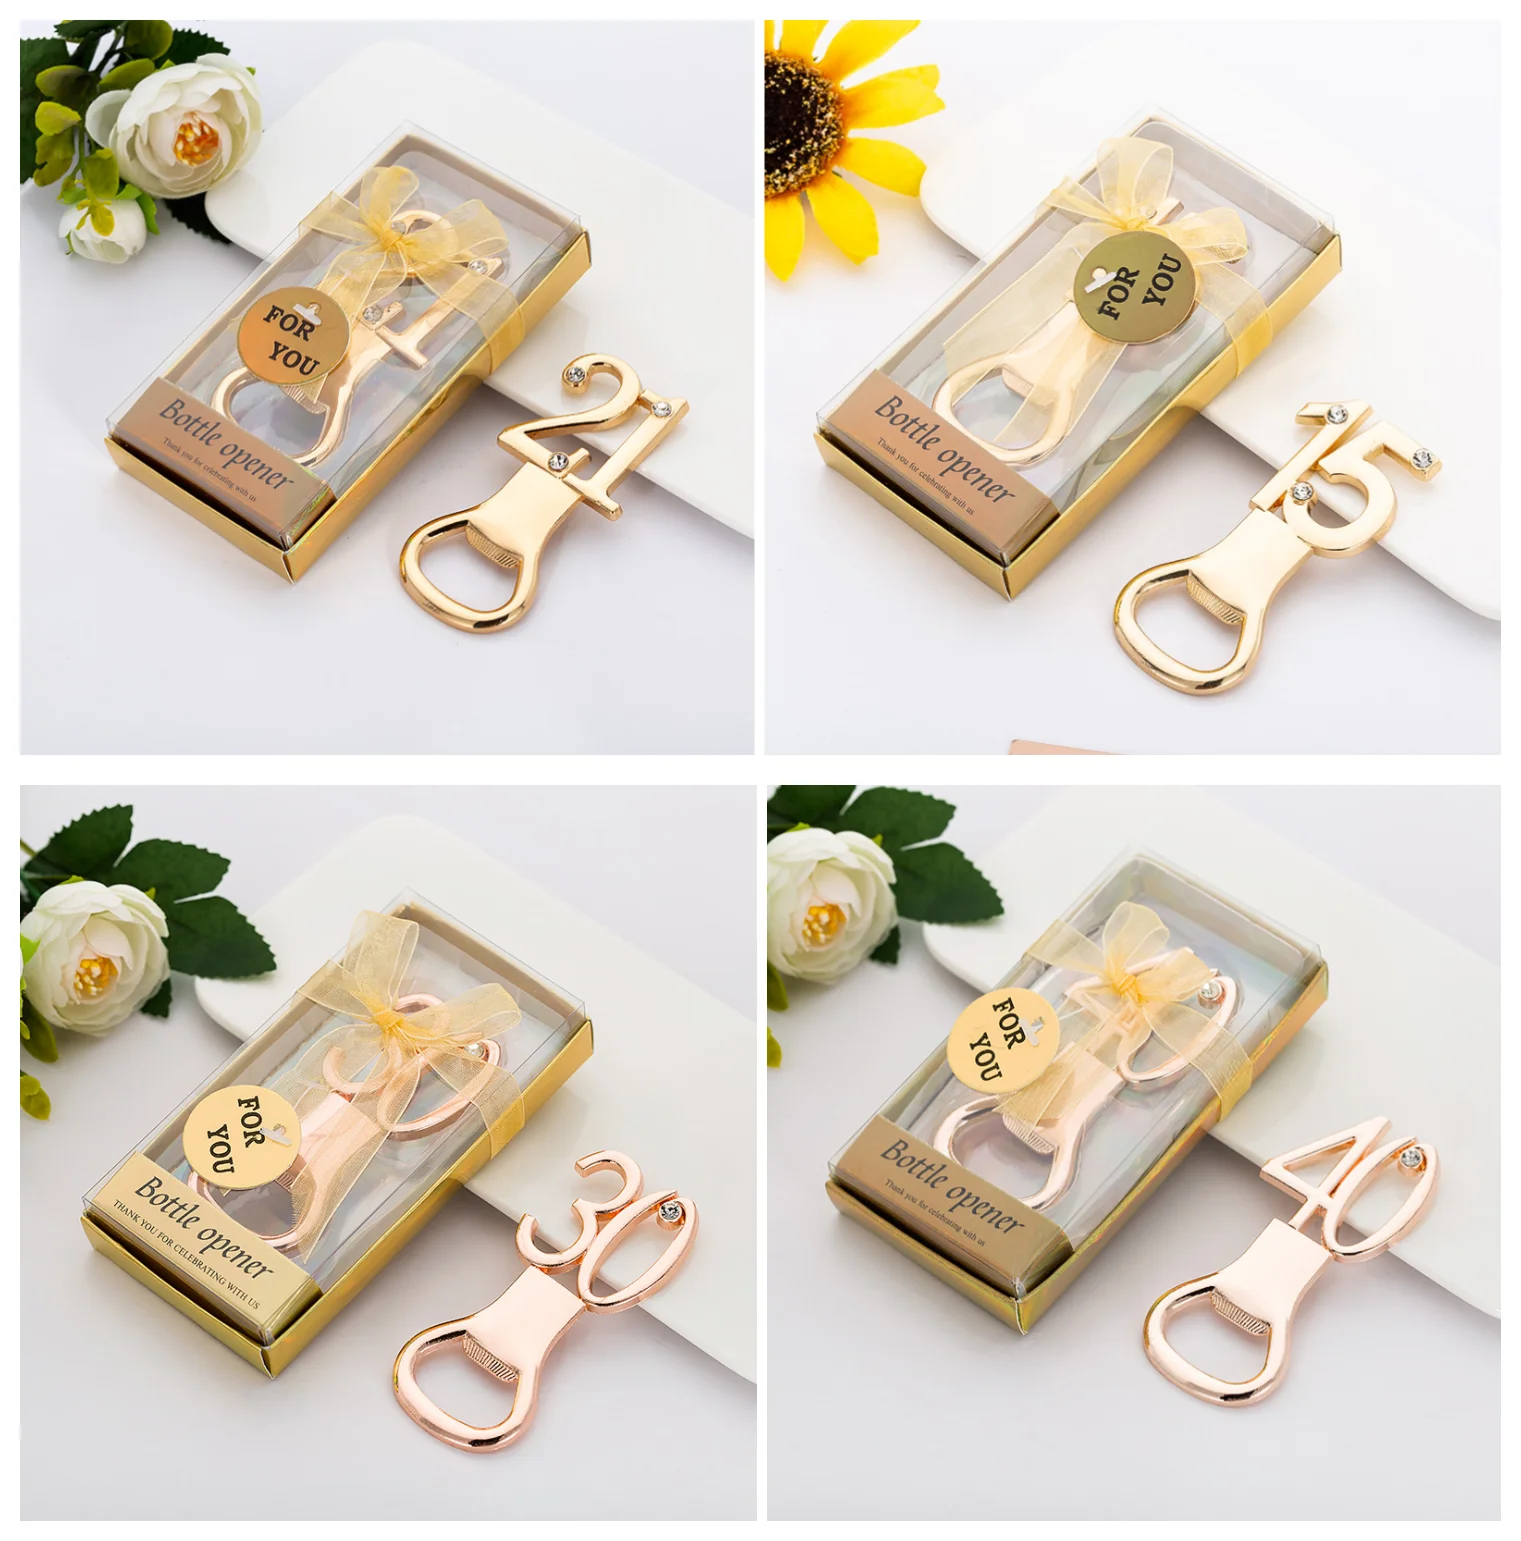 

10pcs/lot Wedding Anniversary Party Favors Adult Ceremony Guest Giveaways Birthday Creative Gift Bottle Opener For Party Present